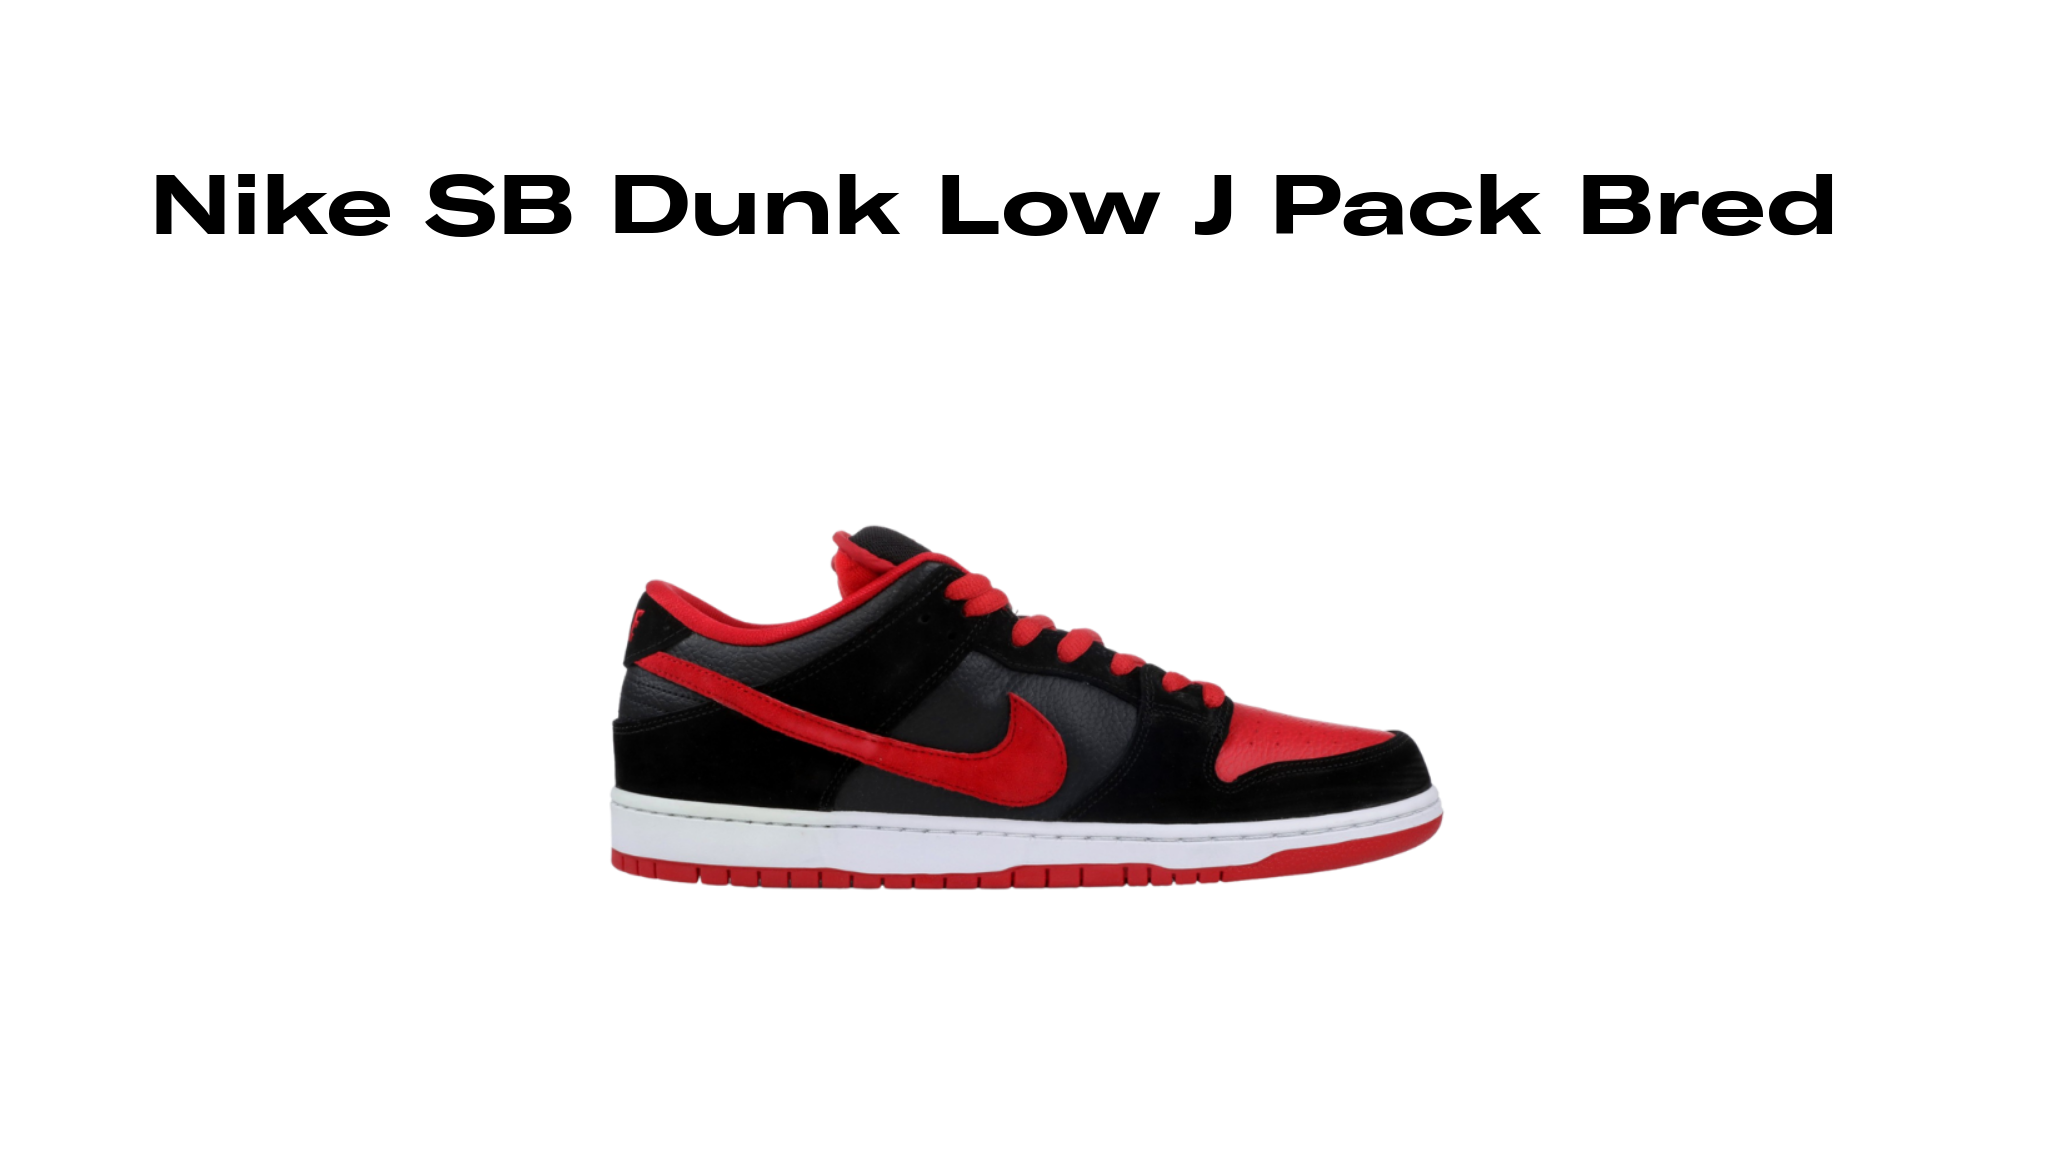 Nike SB Dunk Low J Pack Bred Release Date, Raffles, and Where to Buy